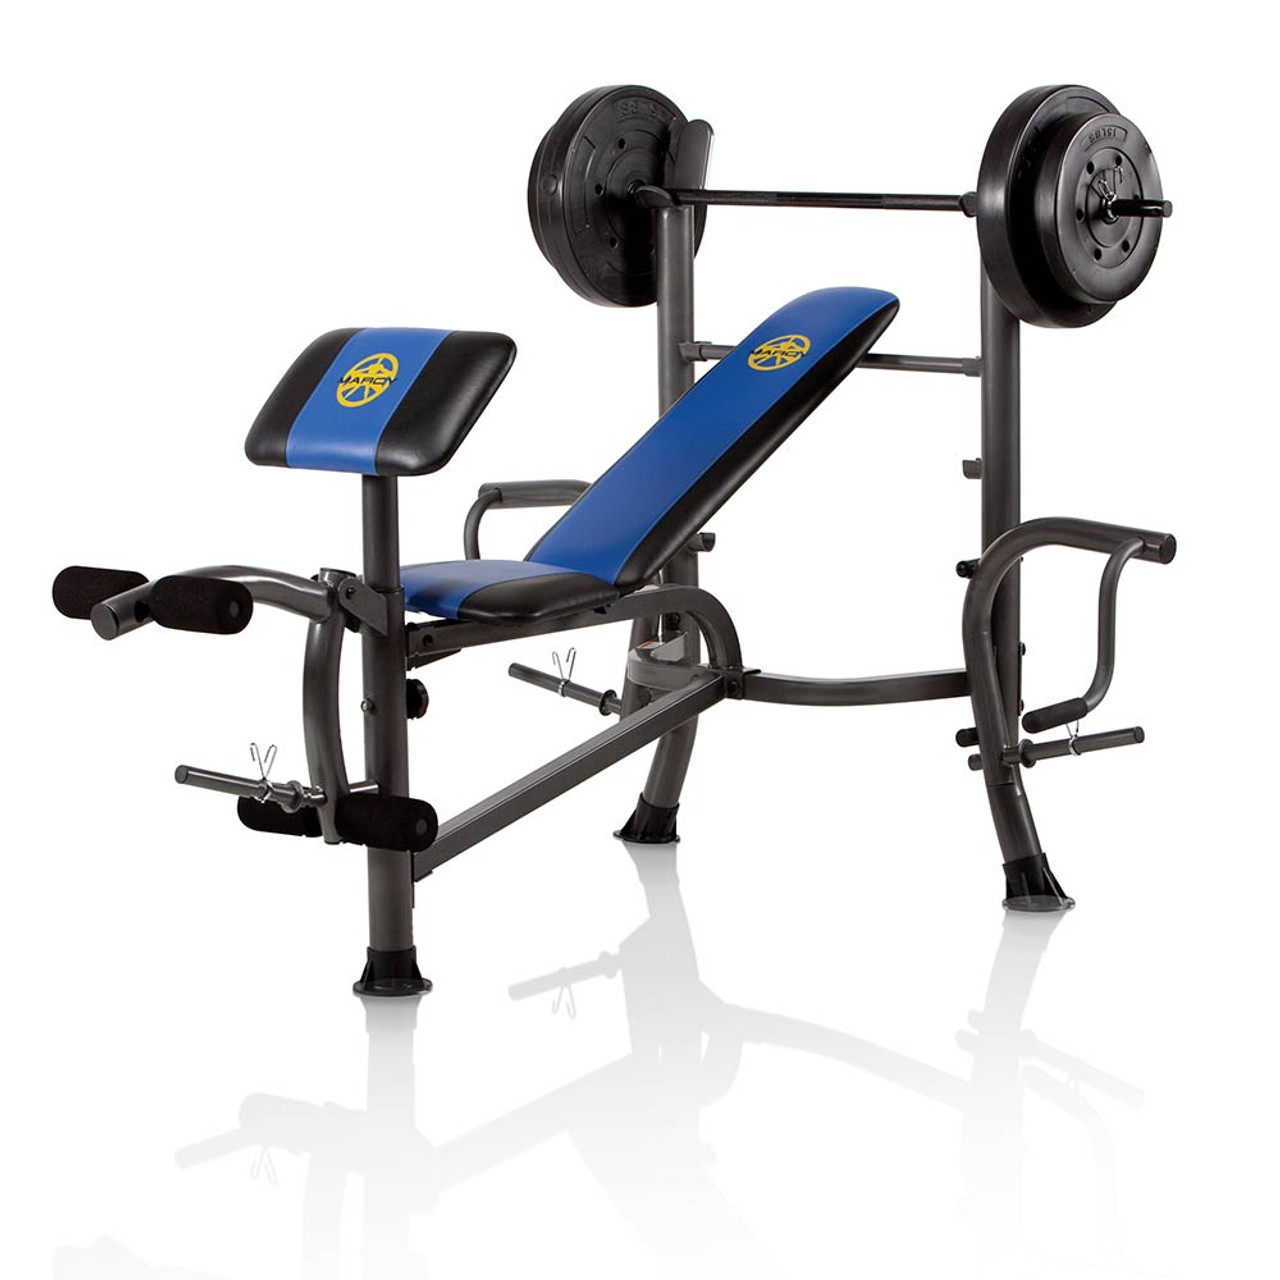 Marcy Standard Bench 80 Lb Weight Set Heavy Duty High Quality